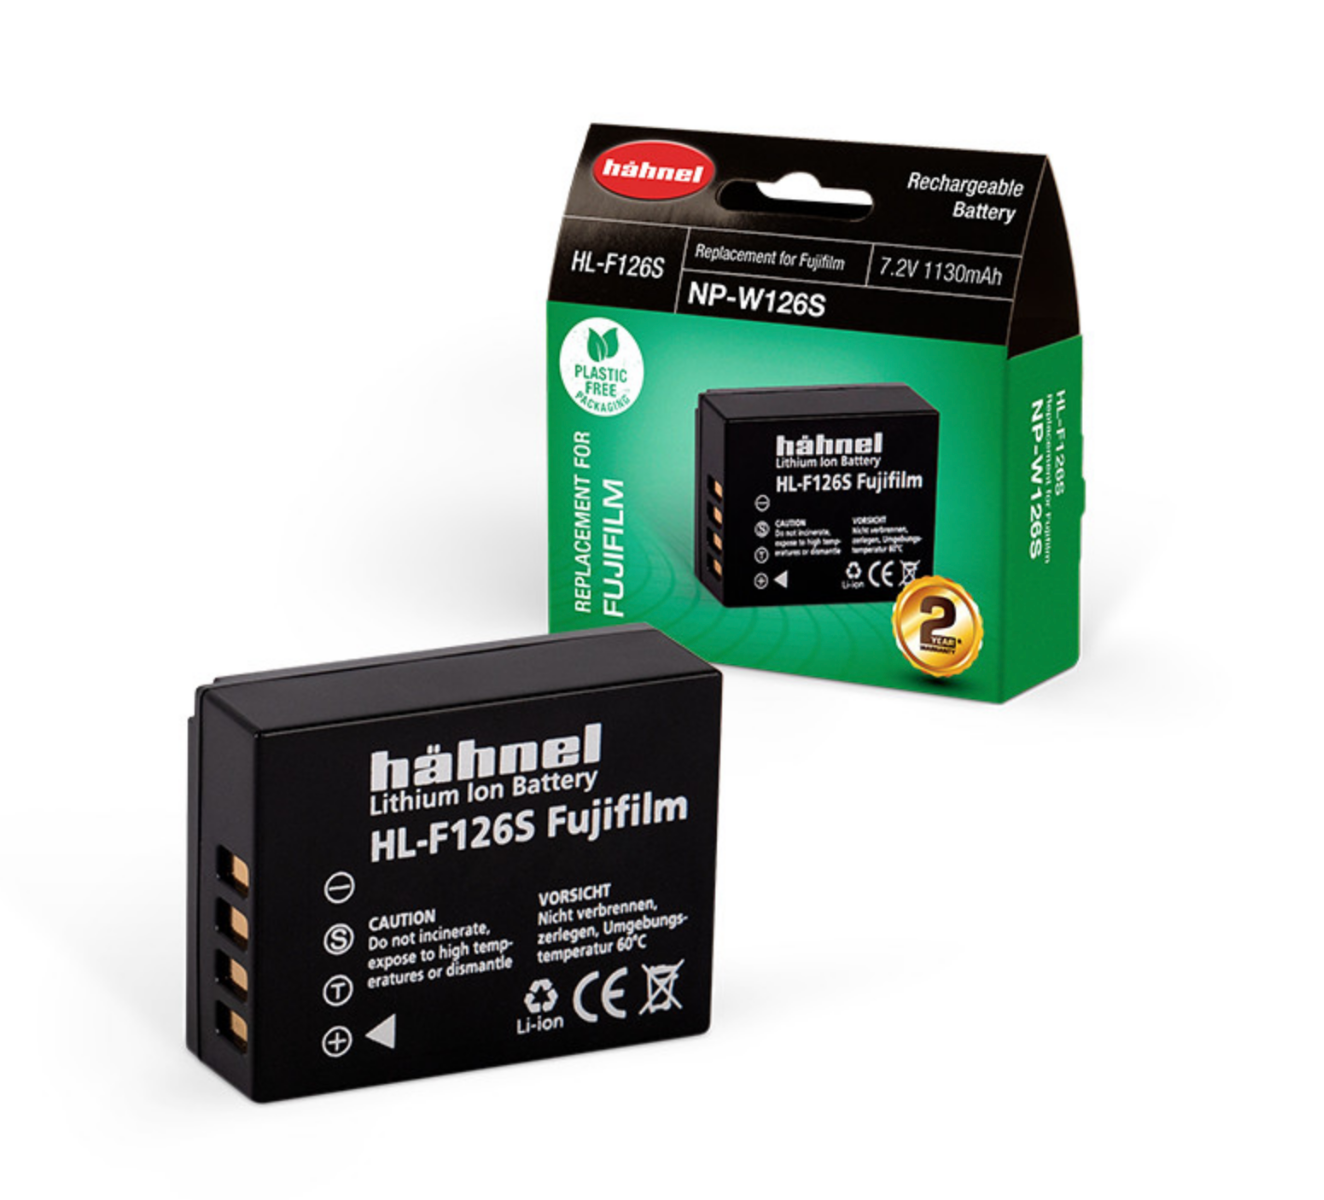 Product Image of Hahnel HL-F126 Li ion Replacement Battery for Fujifilm NP-W126